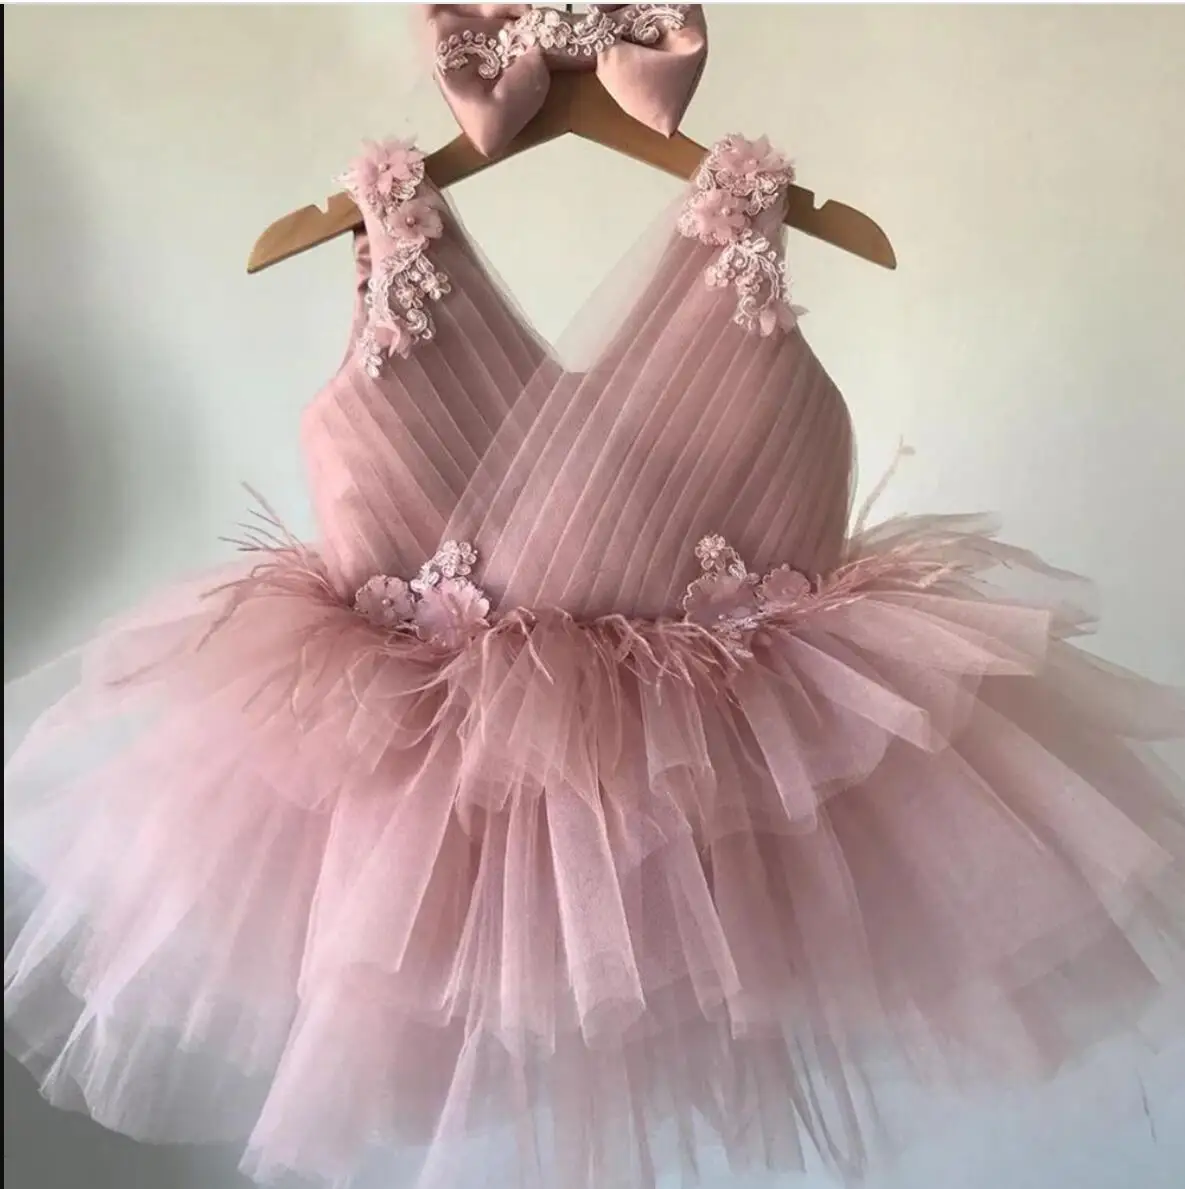 

Sleeveless Princess Dress With Bow Pink Kids Flower Girl Dresses Puffy Tulle Communion Dresses Puff sleeves Girl Dress